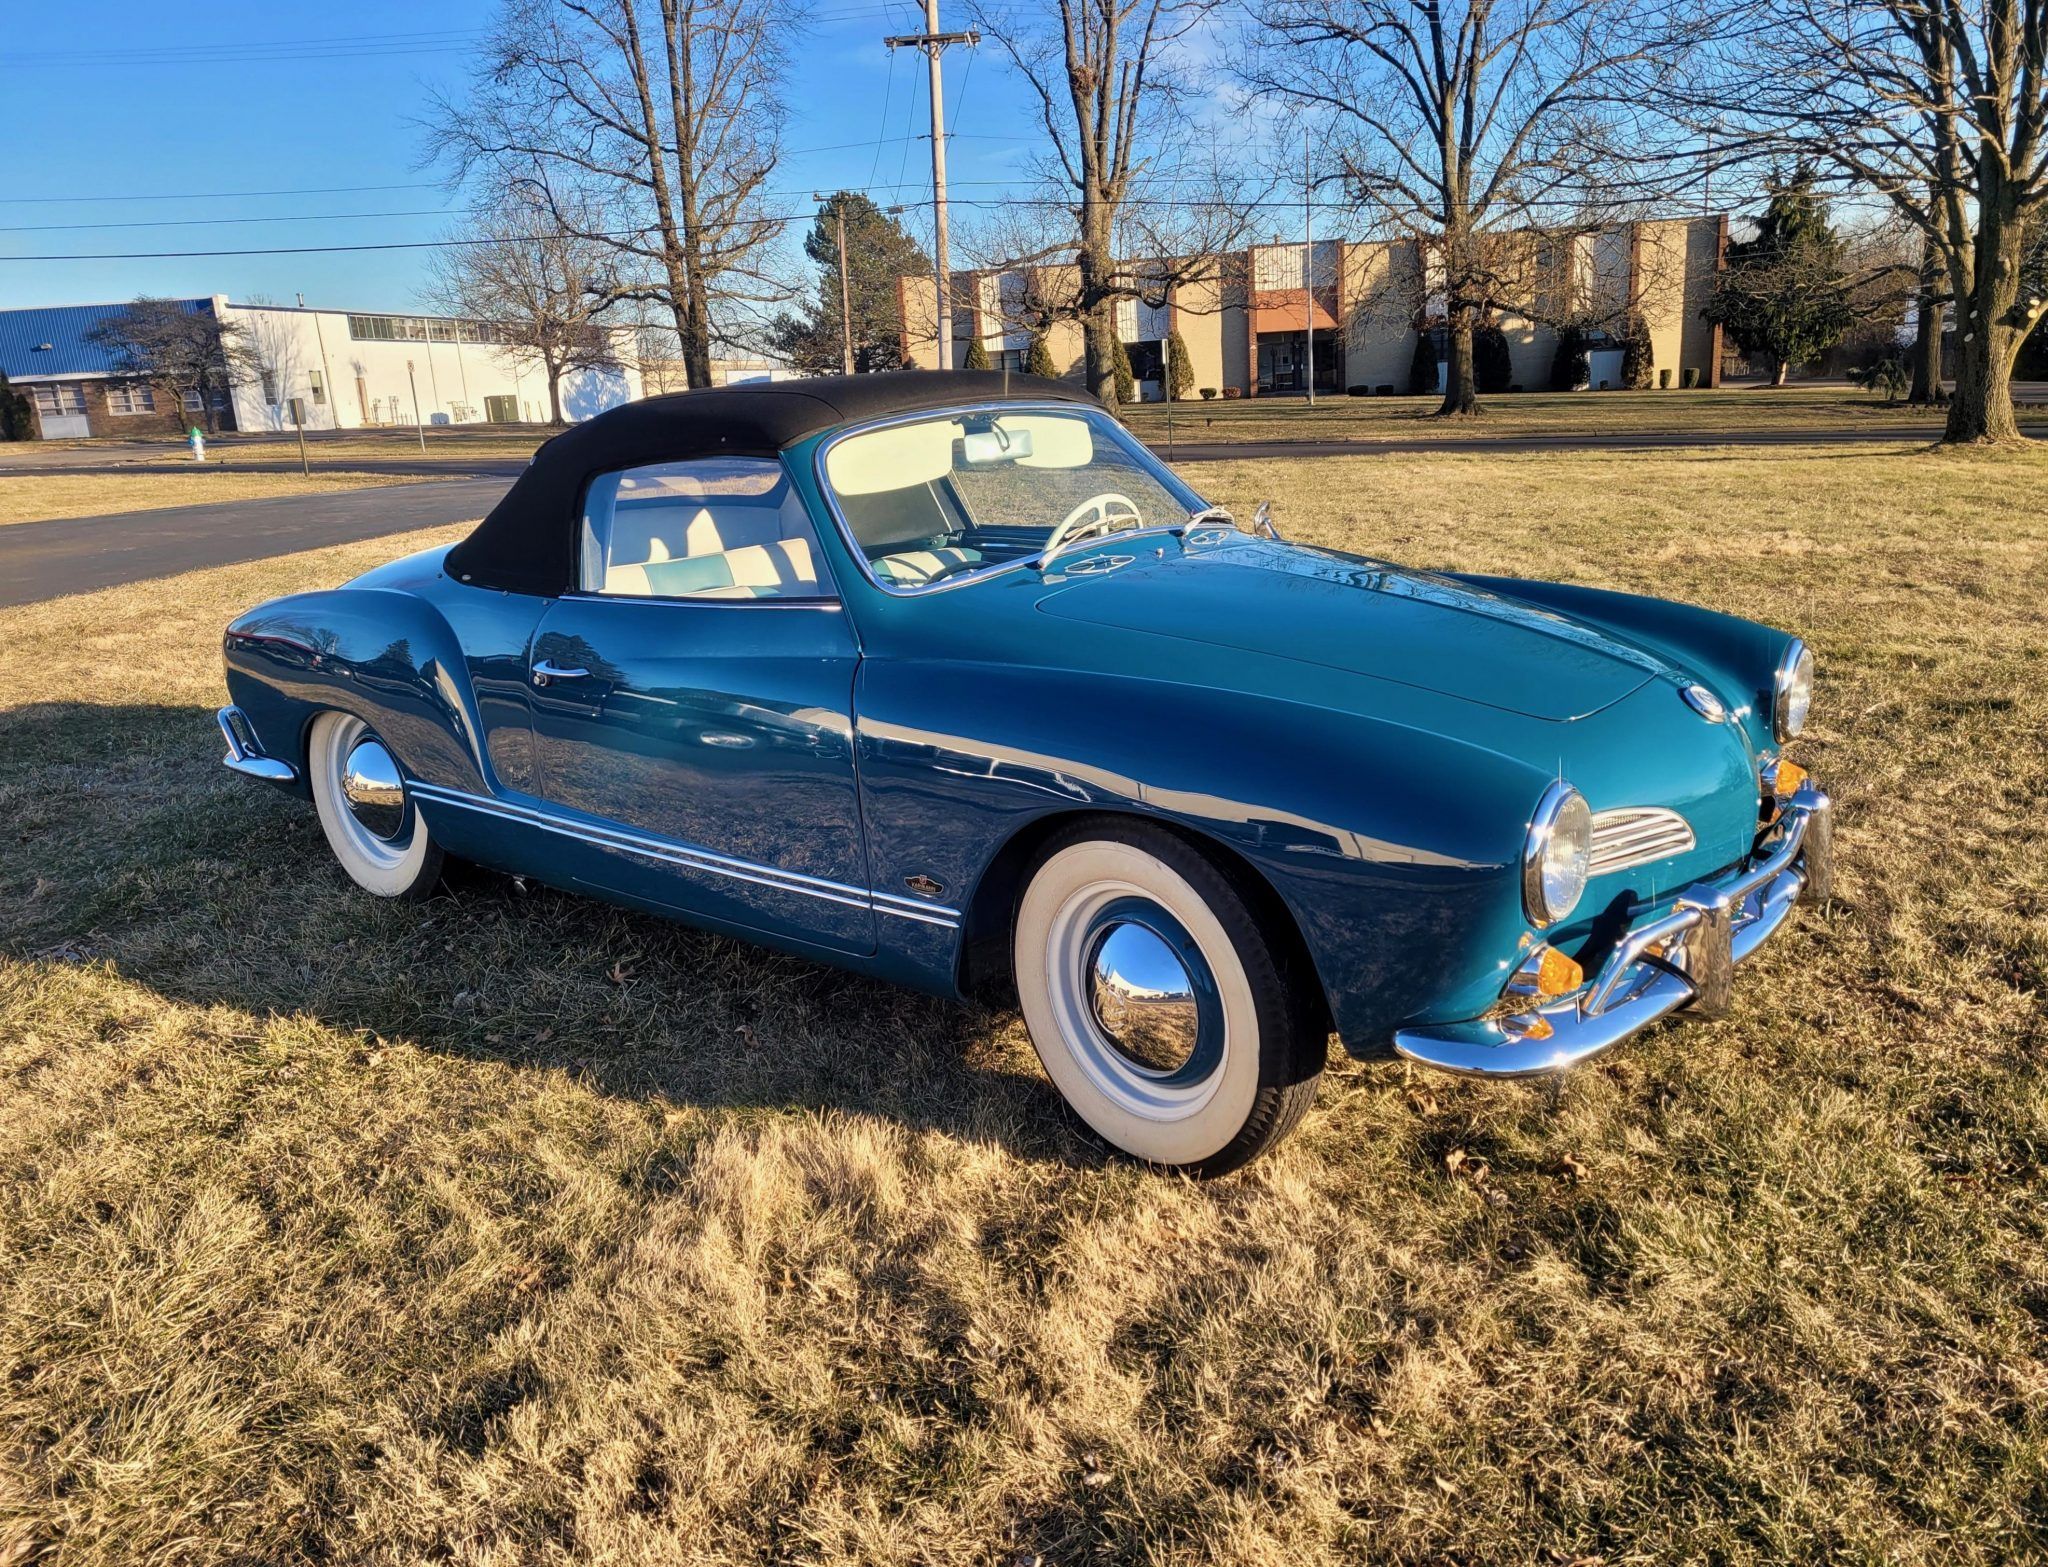 What pale blue older style (50's, 60's, or 70's) convertible